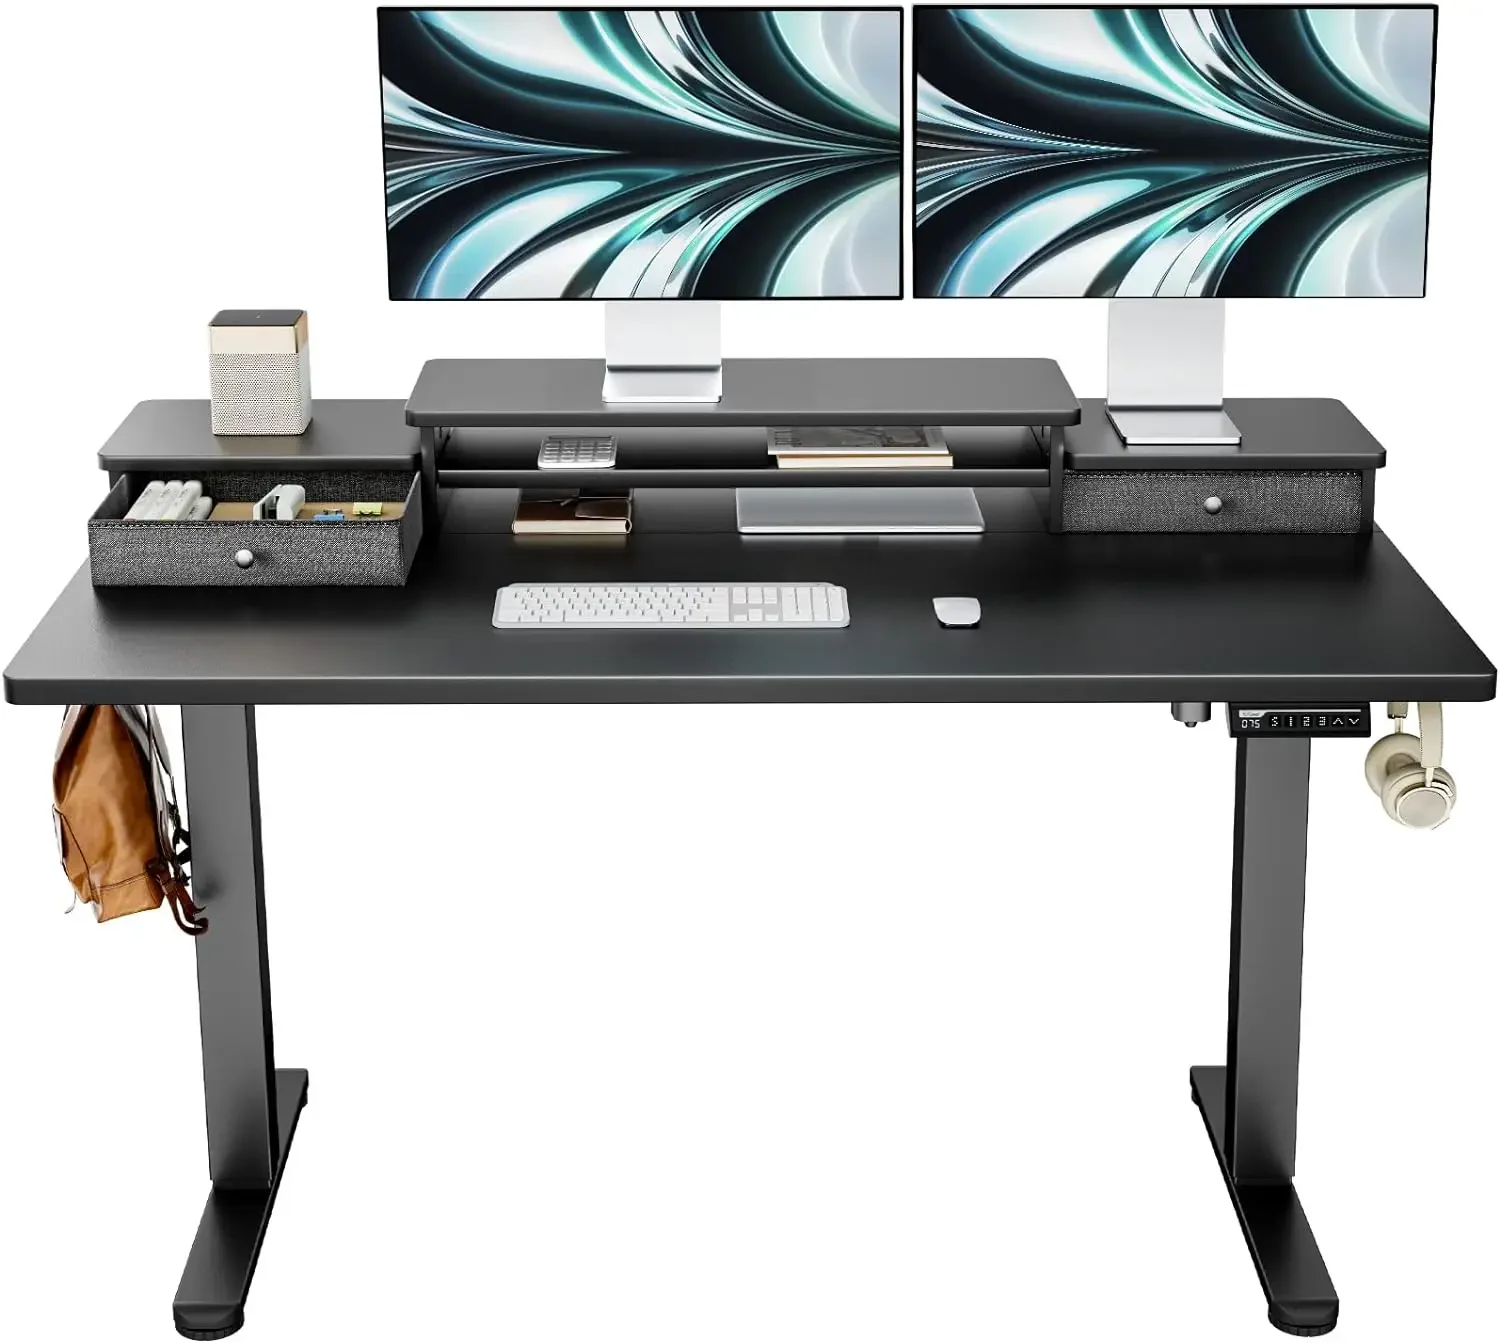 

Electric Standing Desk with Double Drawers Adjustable Height Sit Stand Up Desk Home Office Desk Computer Workstation